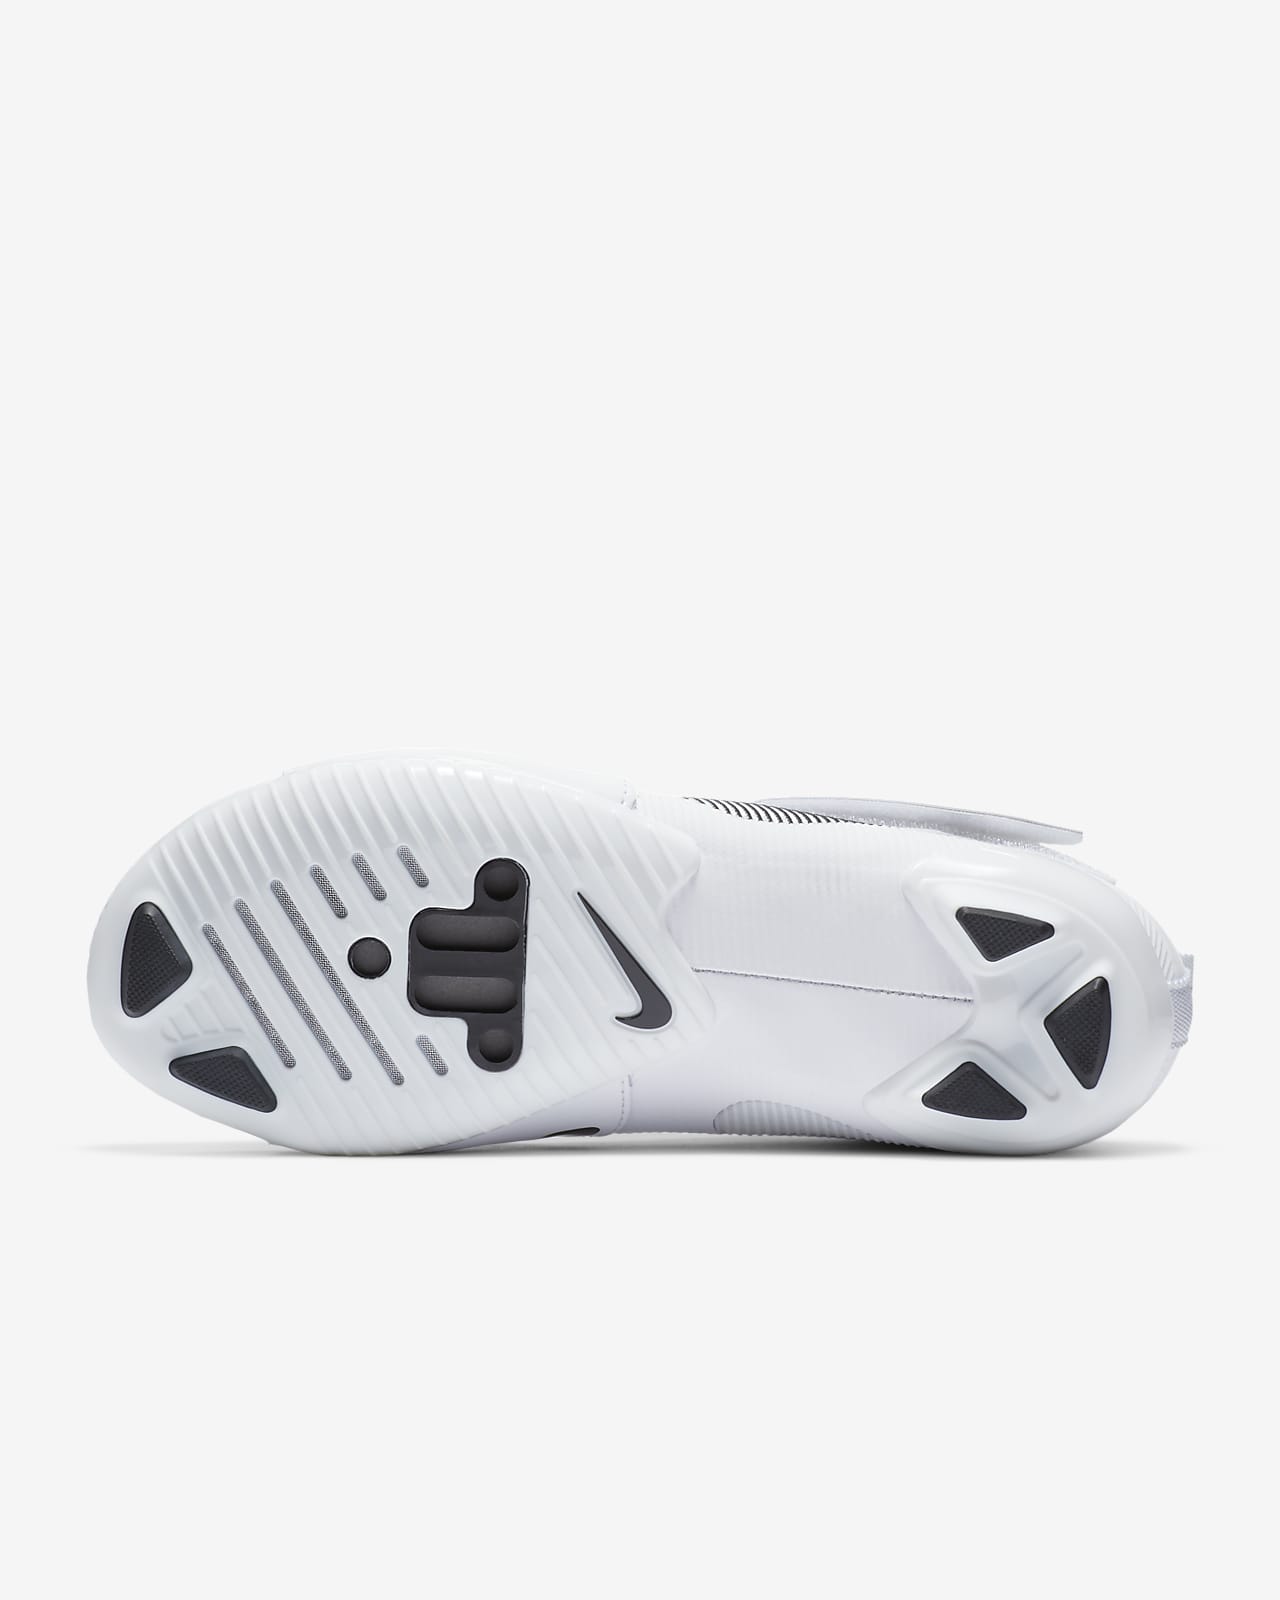 cleats for nike superrep cycle